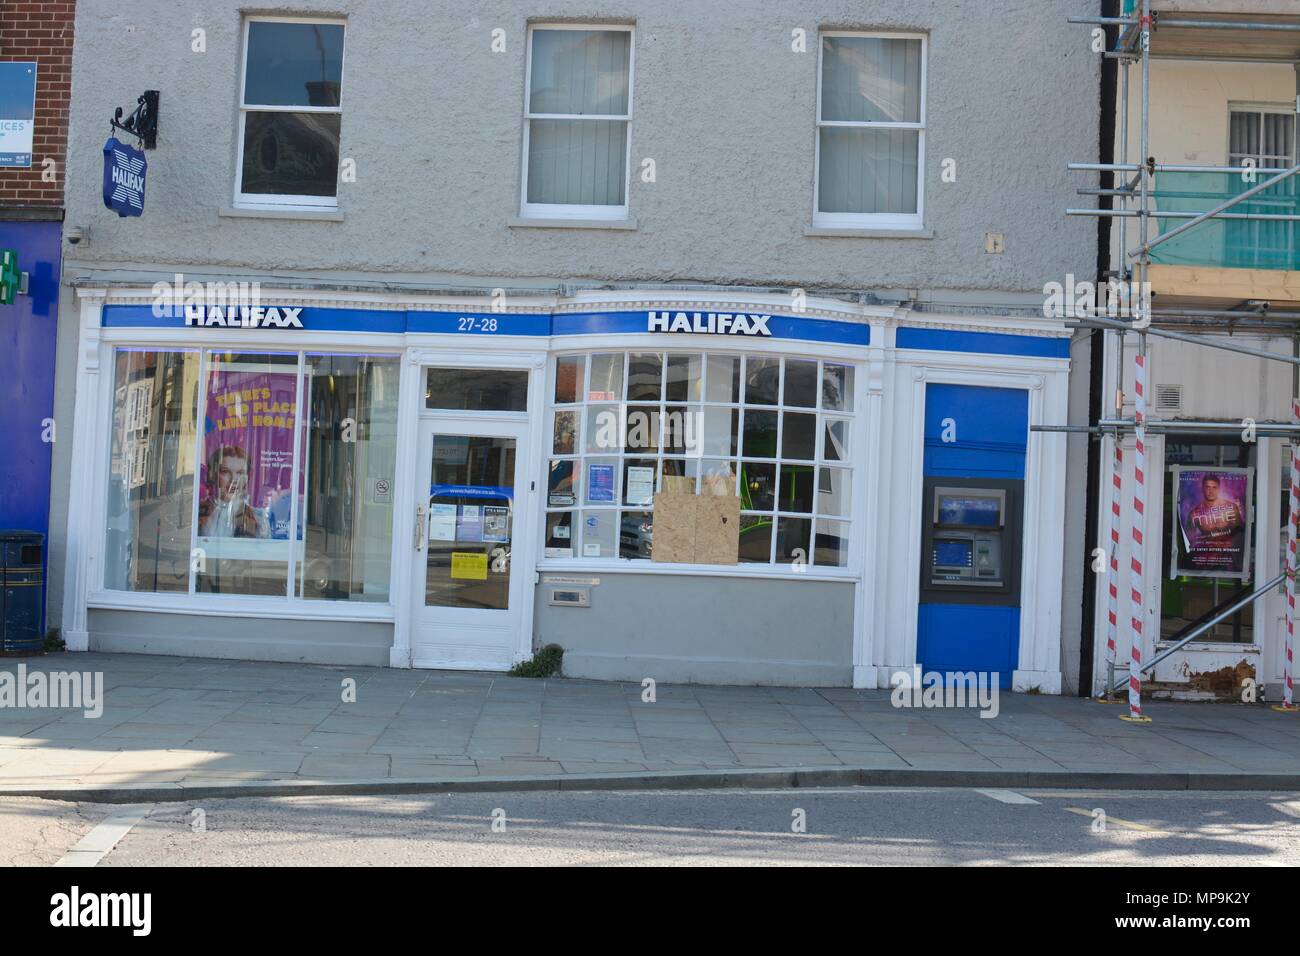 Halifax bank in the town of Boston, Lincolnshire, UK Stock Photo